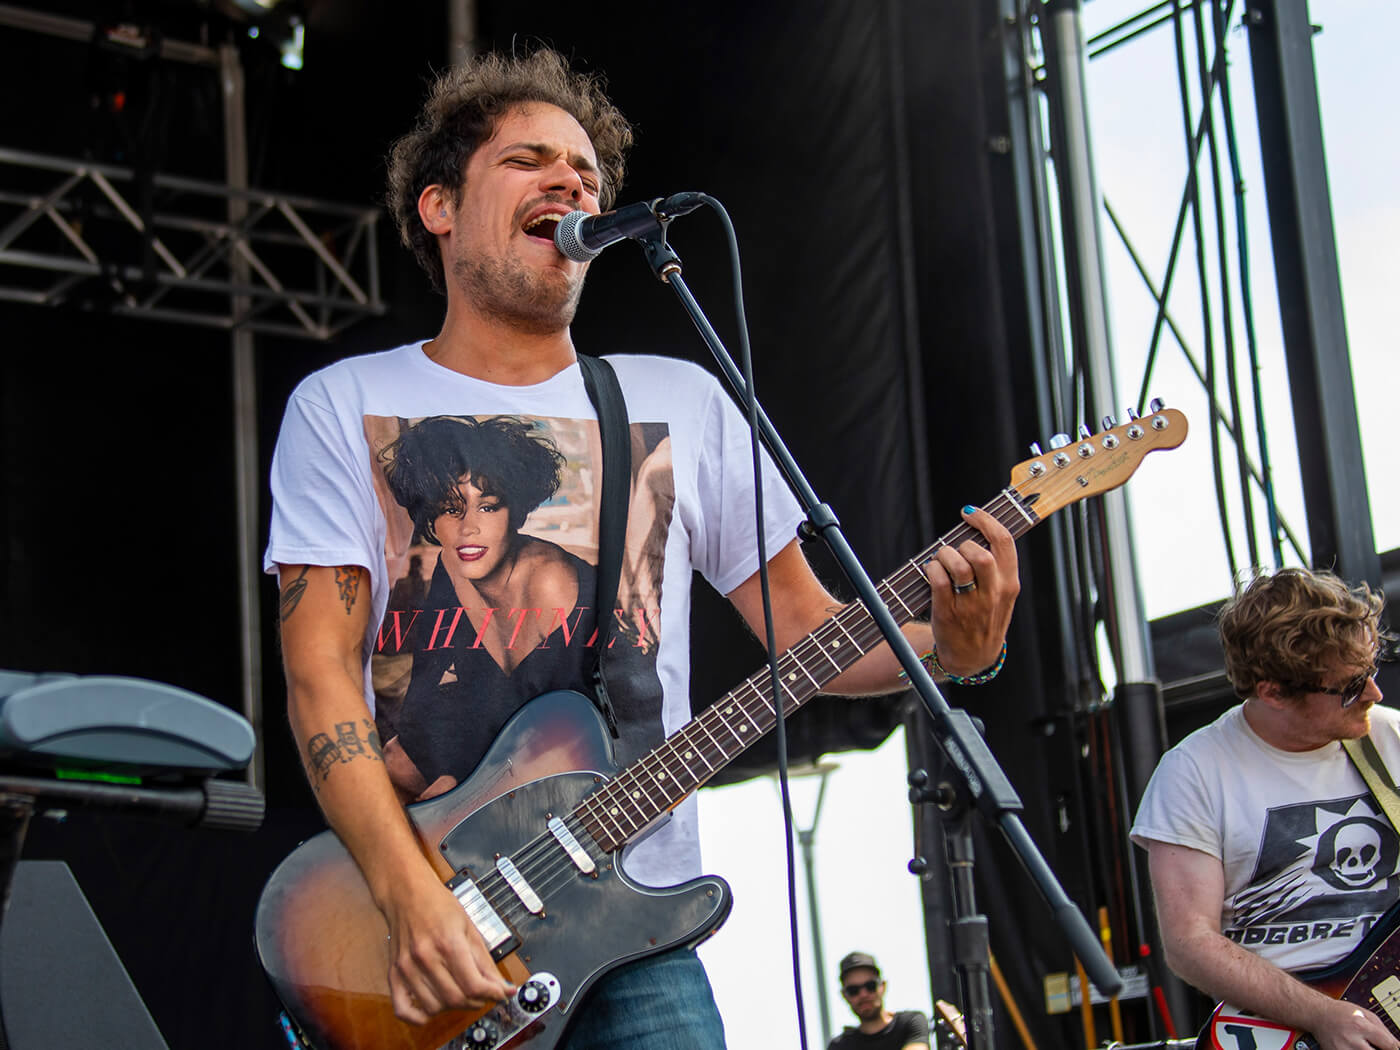 There's so much going on that it flattens out into this layer of dread and  terror”: Jeff Rosenstock on modern America